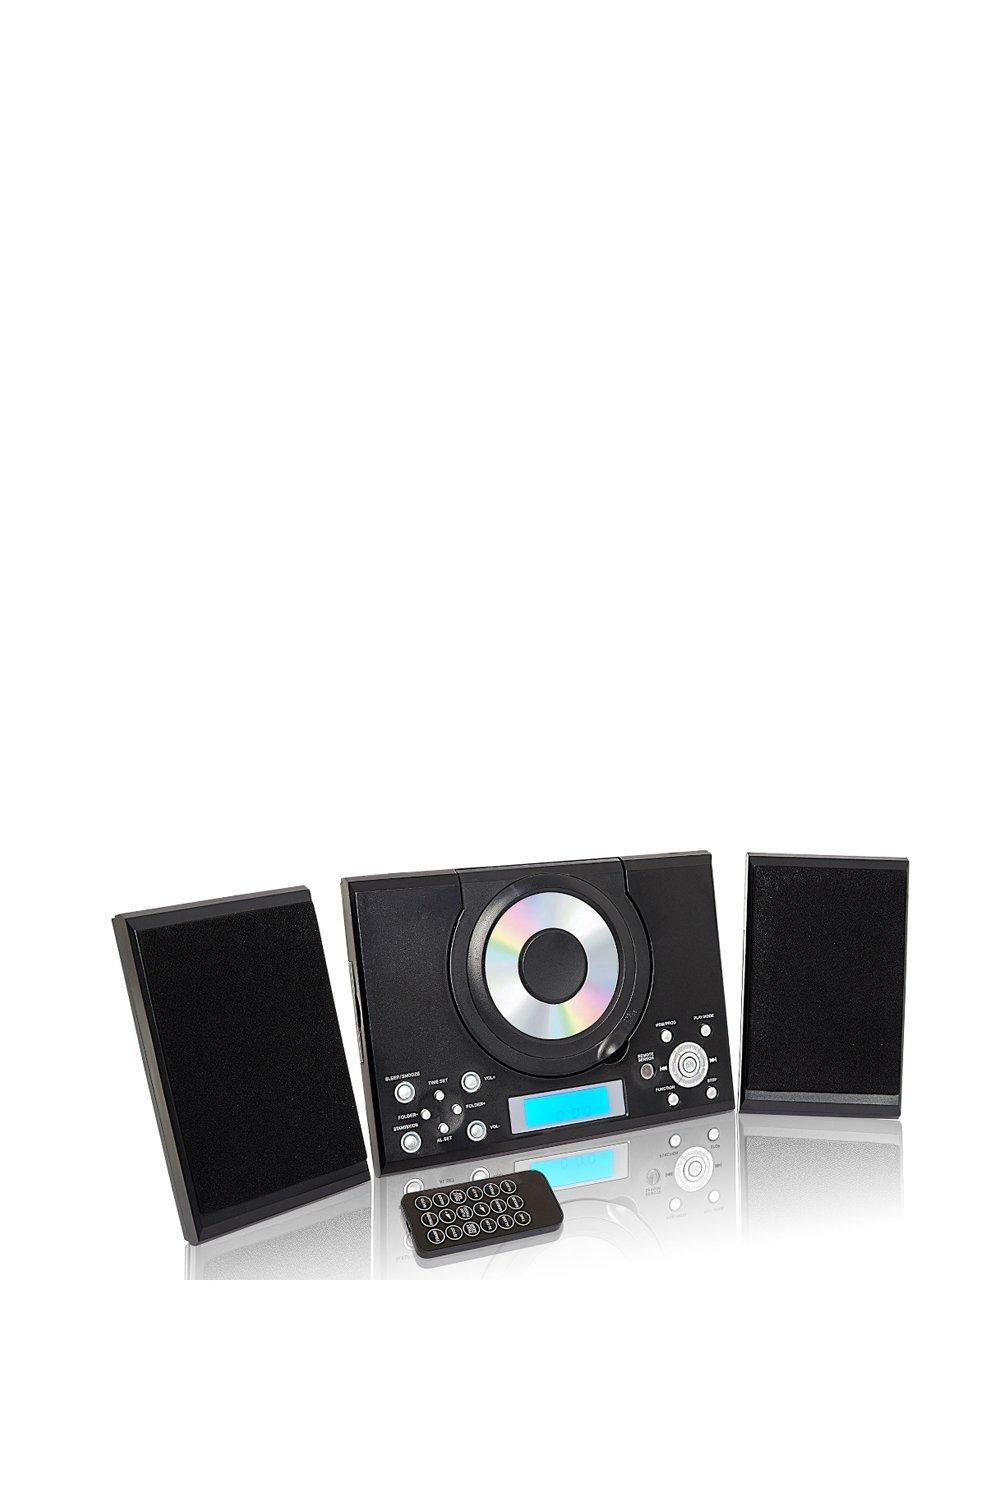 HIFI with CD Player  Radio & AUX IN Socket For Connecting  Phone MP3 Player Tablet or IPod